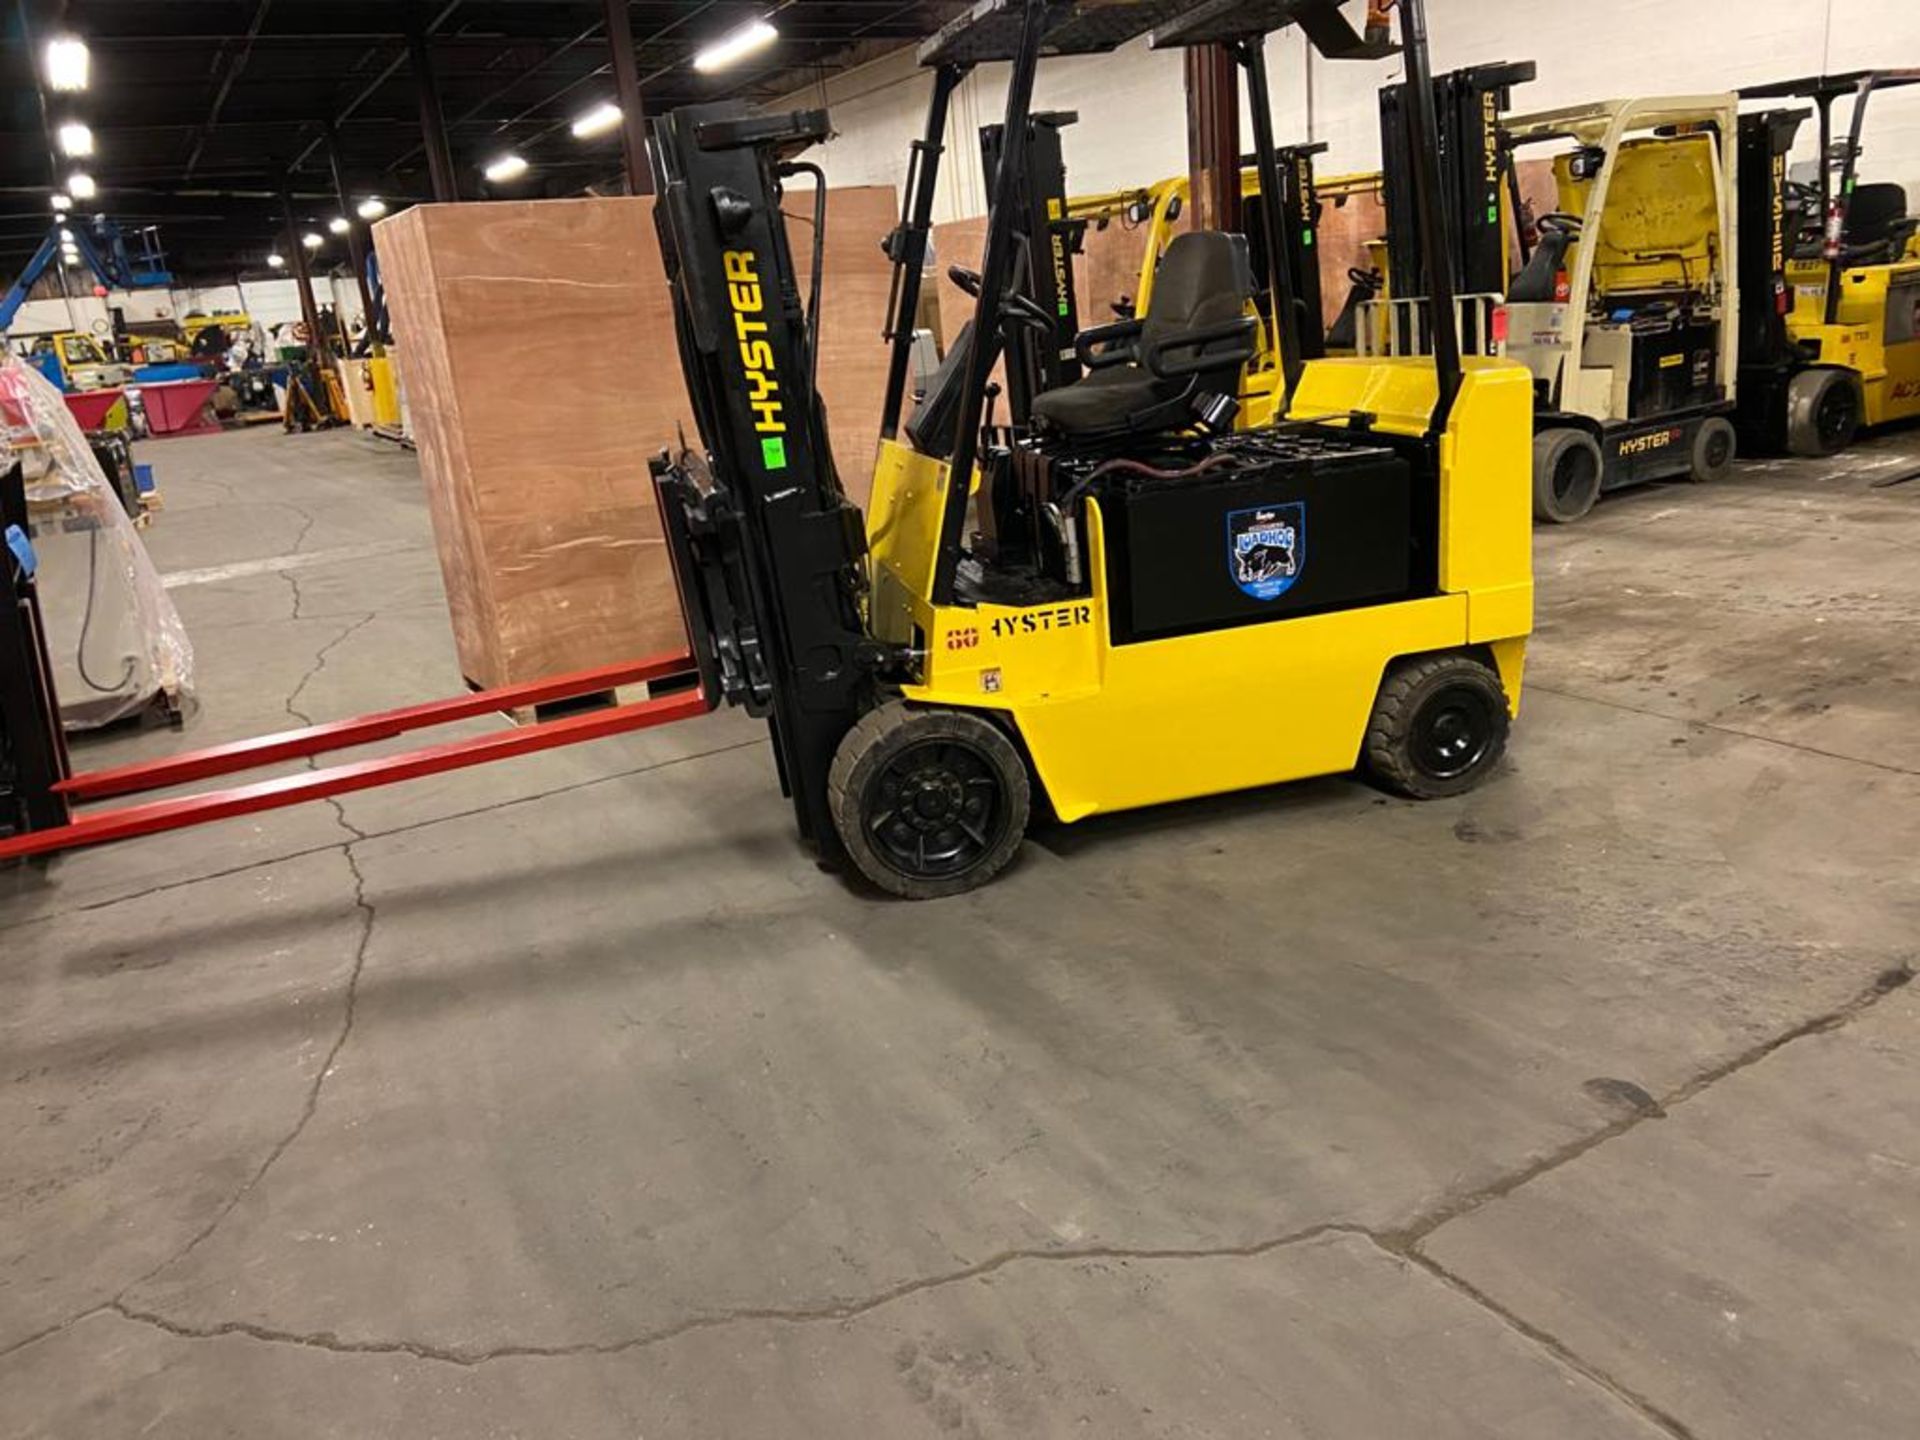 FREE CUSTOMS - Hyster 8000lbs Capacity Forklift Electric with sideshift, 72" forks and 3 stage